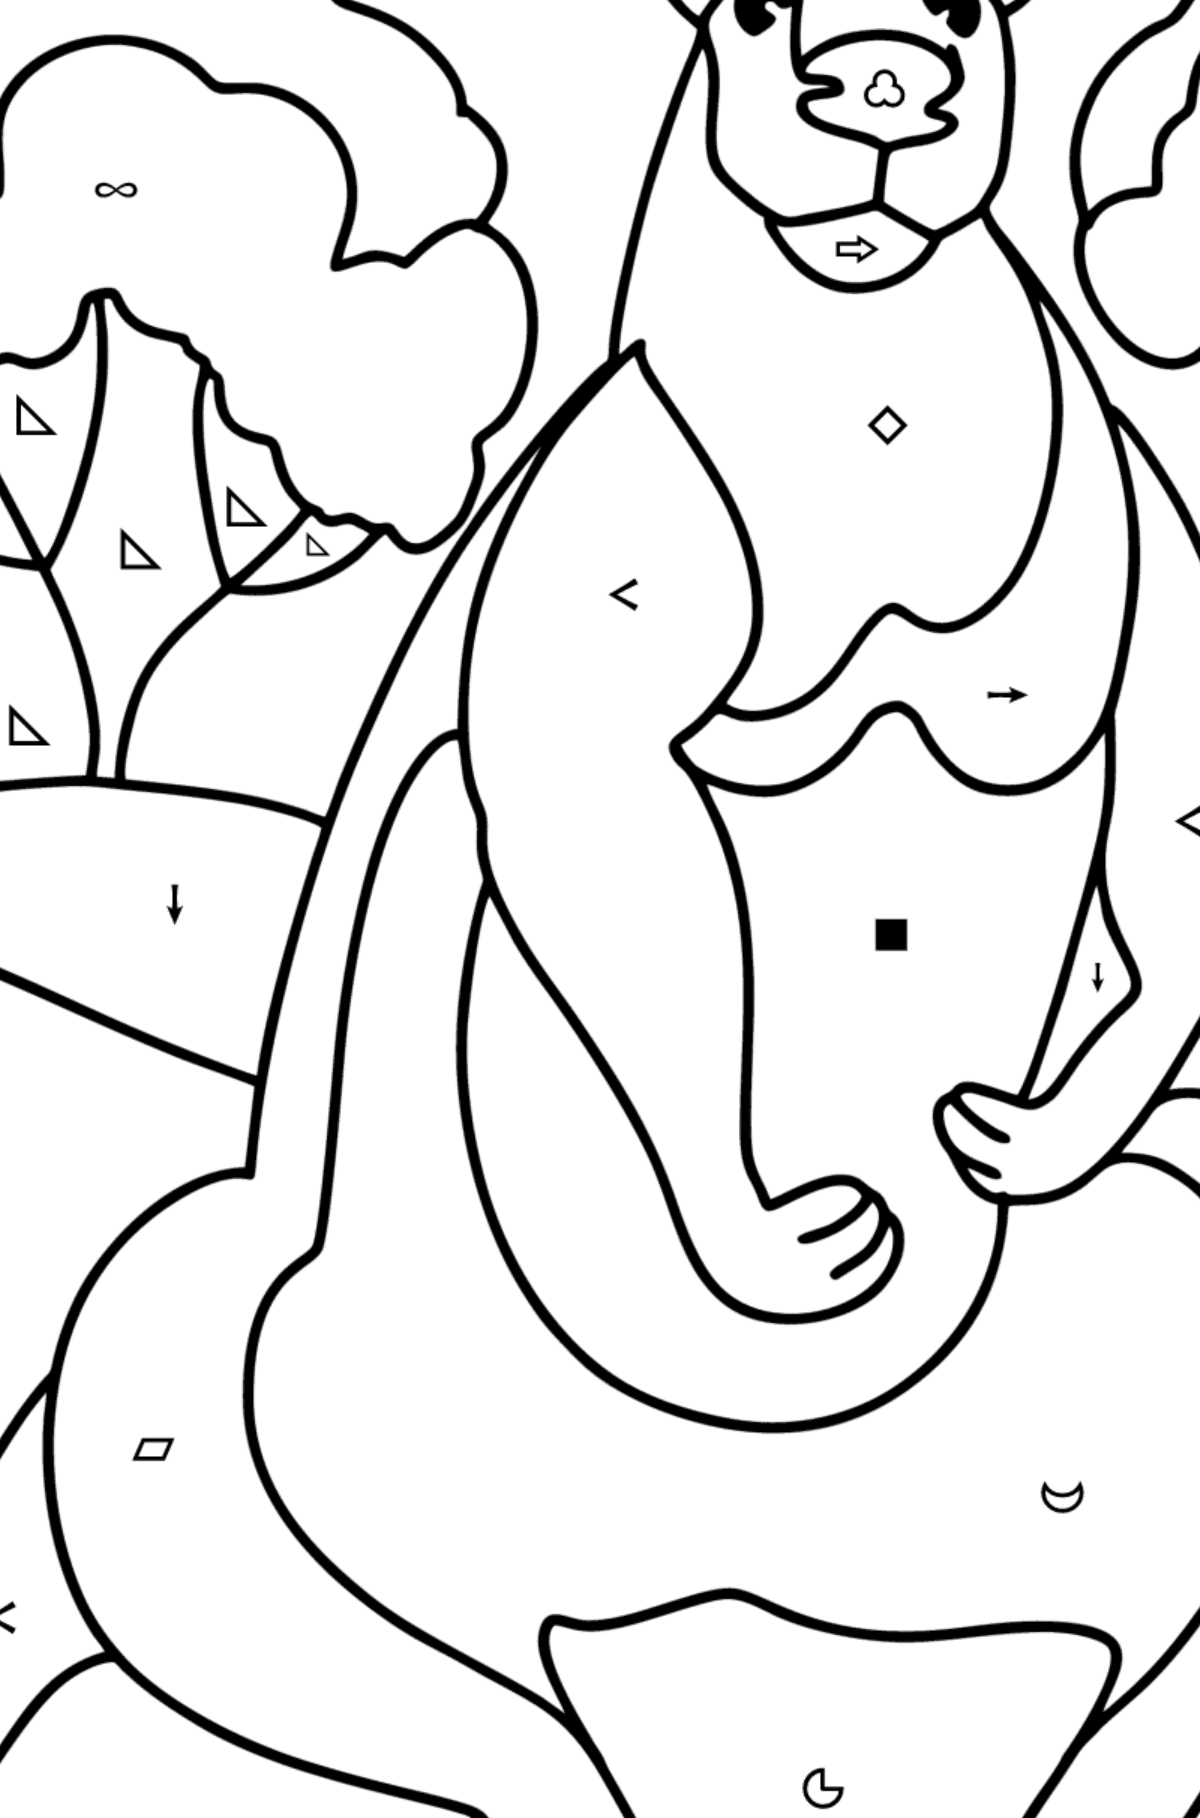 Giant Kangaroo coloring page - Coloring by Symbols and Geometric Shapes for Kids